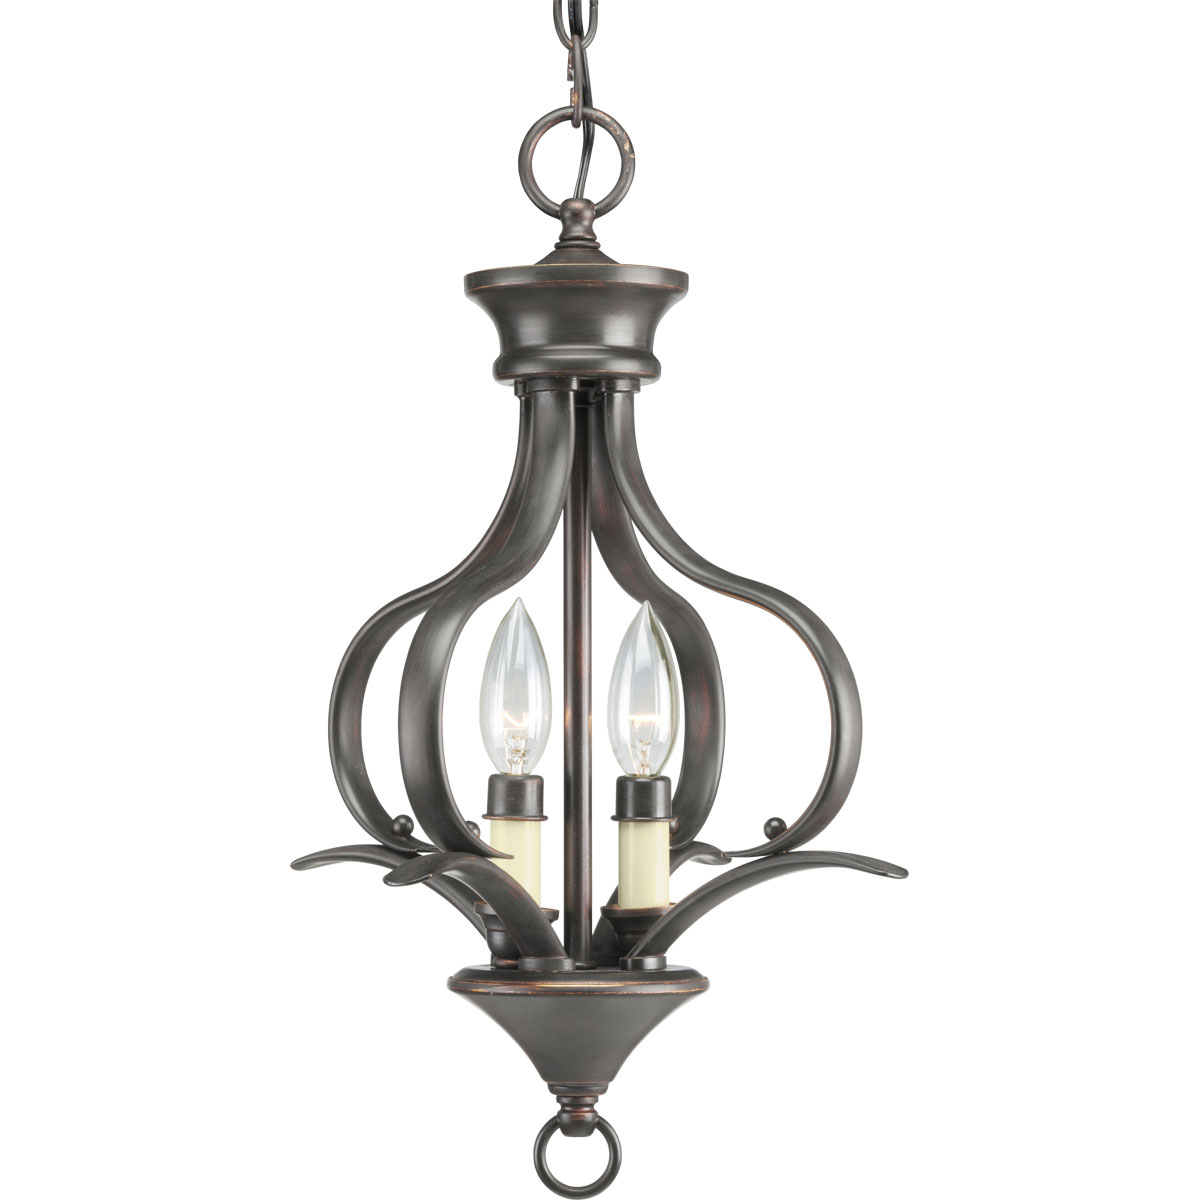 Two-light foyer fixture featuring soft angles, curving lines. Gracefully exotic, the Trinity Collection offers classic sophistication for transitional interiors. Sculptural forms of metal are enhanced by a classic finish. This transitional style can transform a room or your whole home with its charming versatility. Antique Bronze finish.